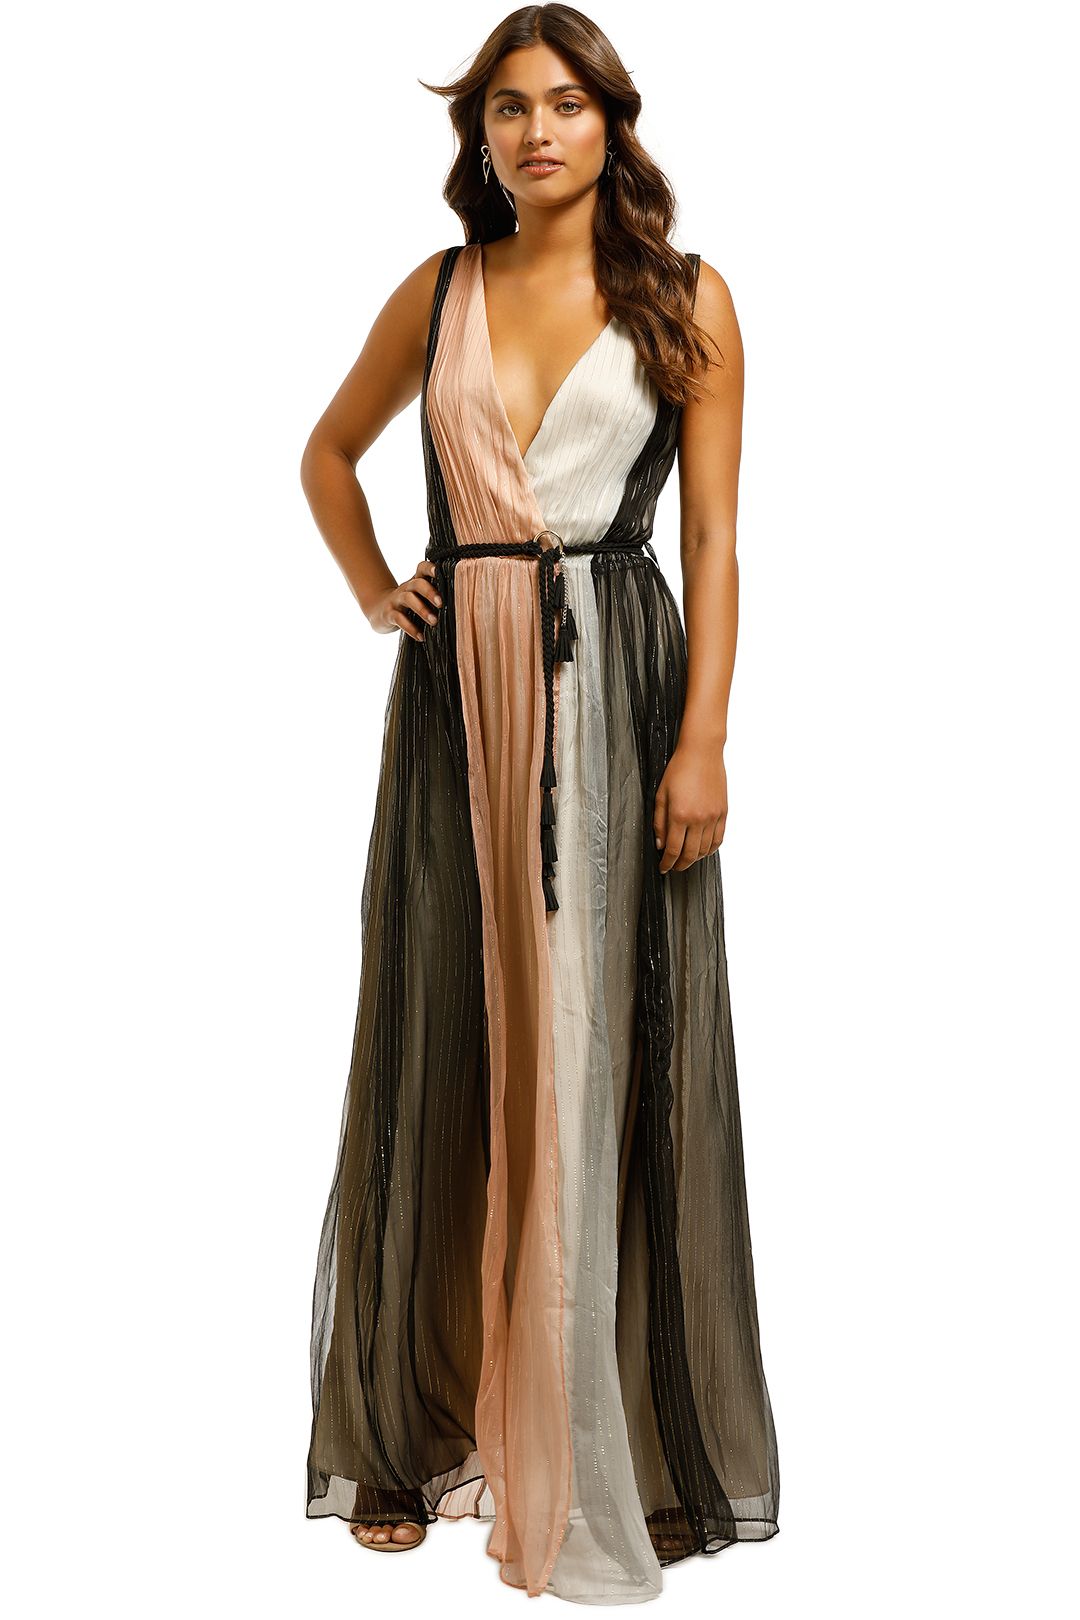 We-Are-Kindred-Marrakech-Sleeveless-Dress-Eclipse-Front